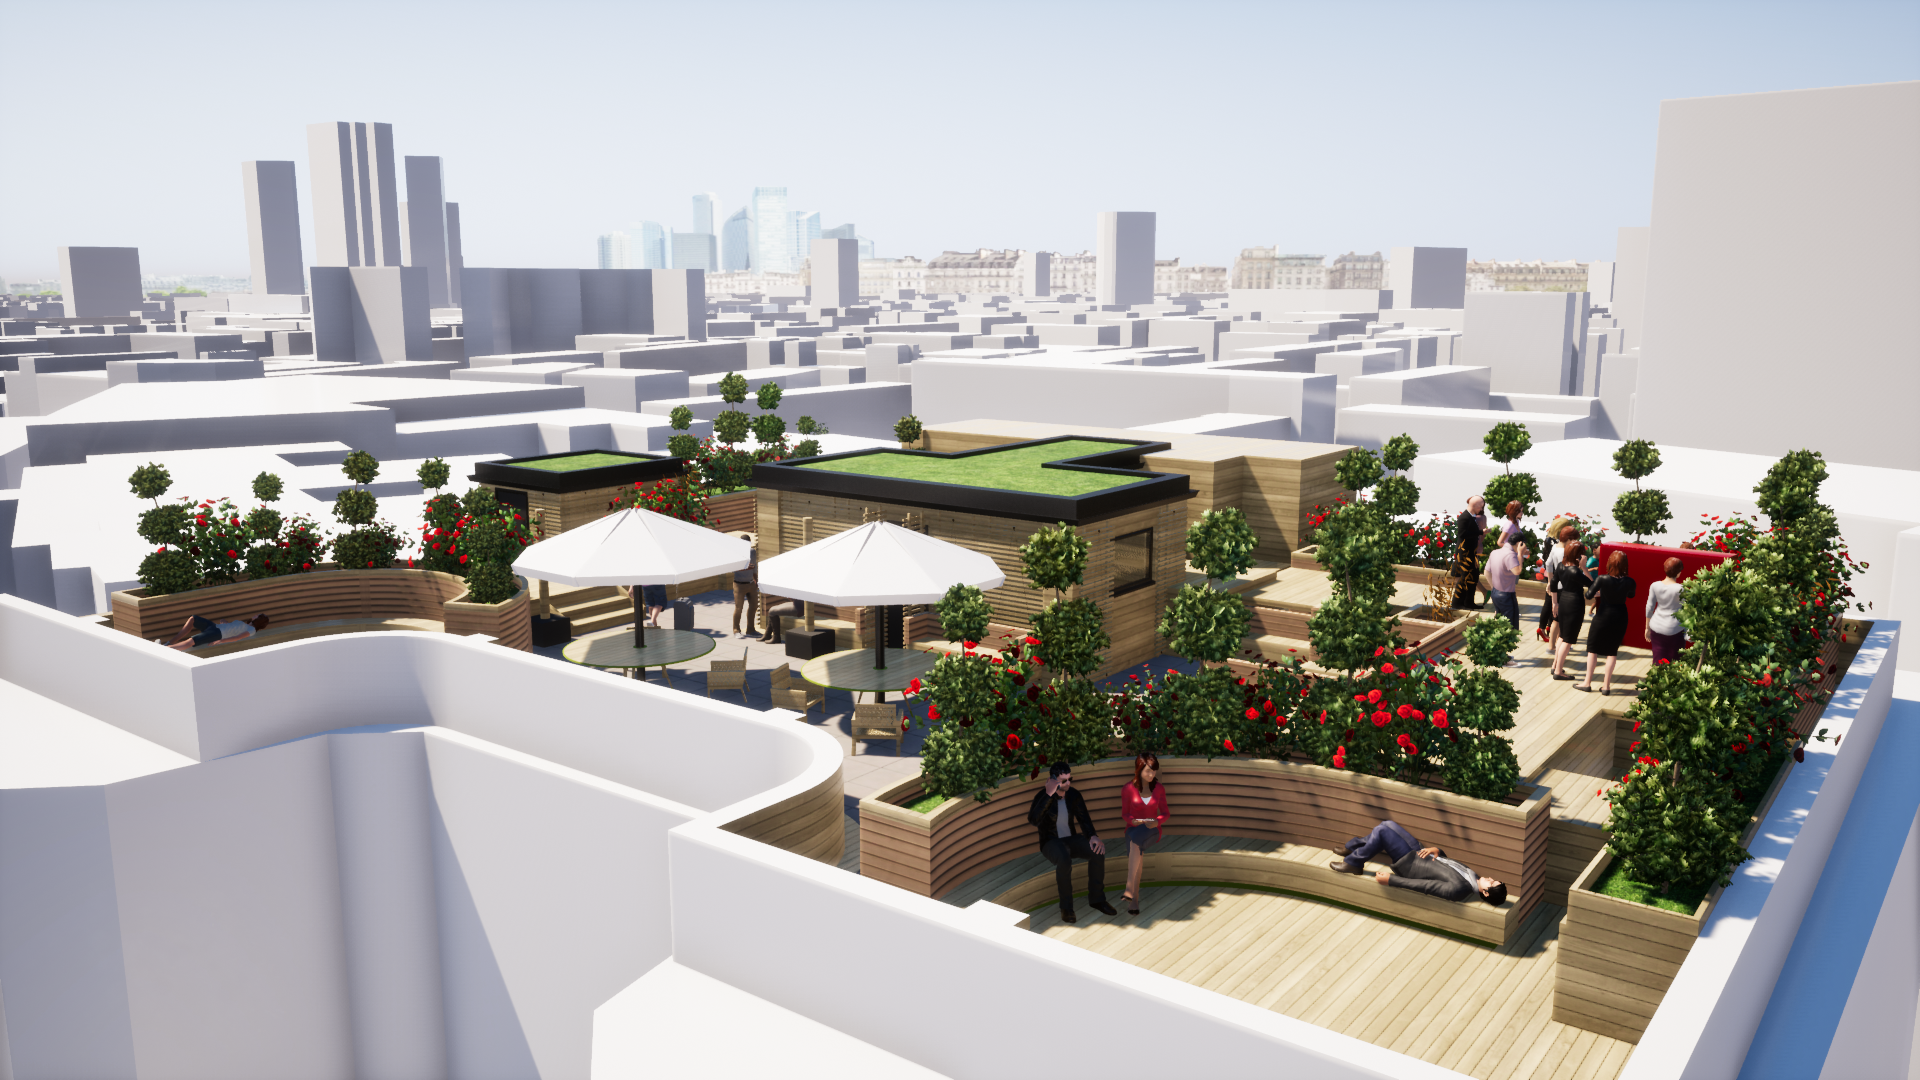 An image showing a 3D model of a roof terrace project in London